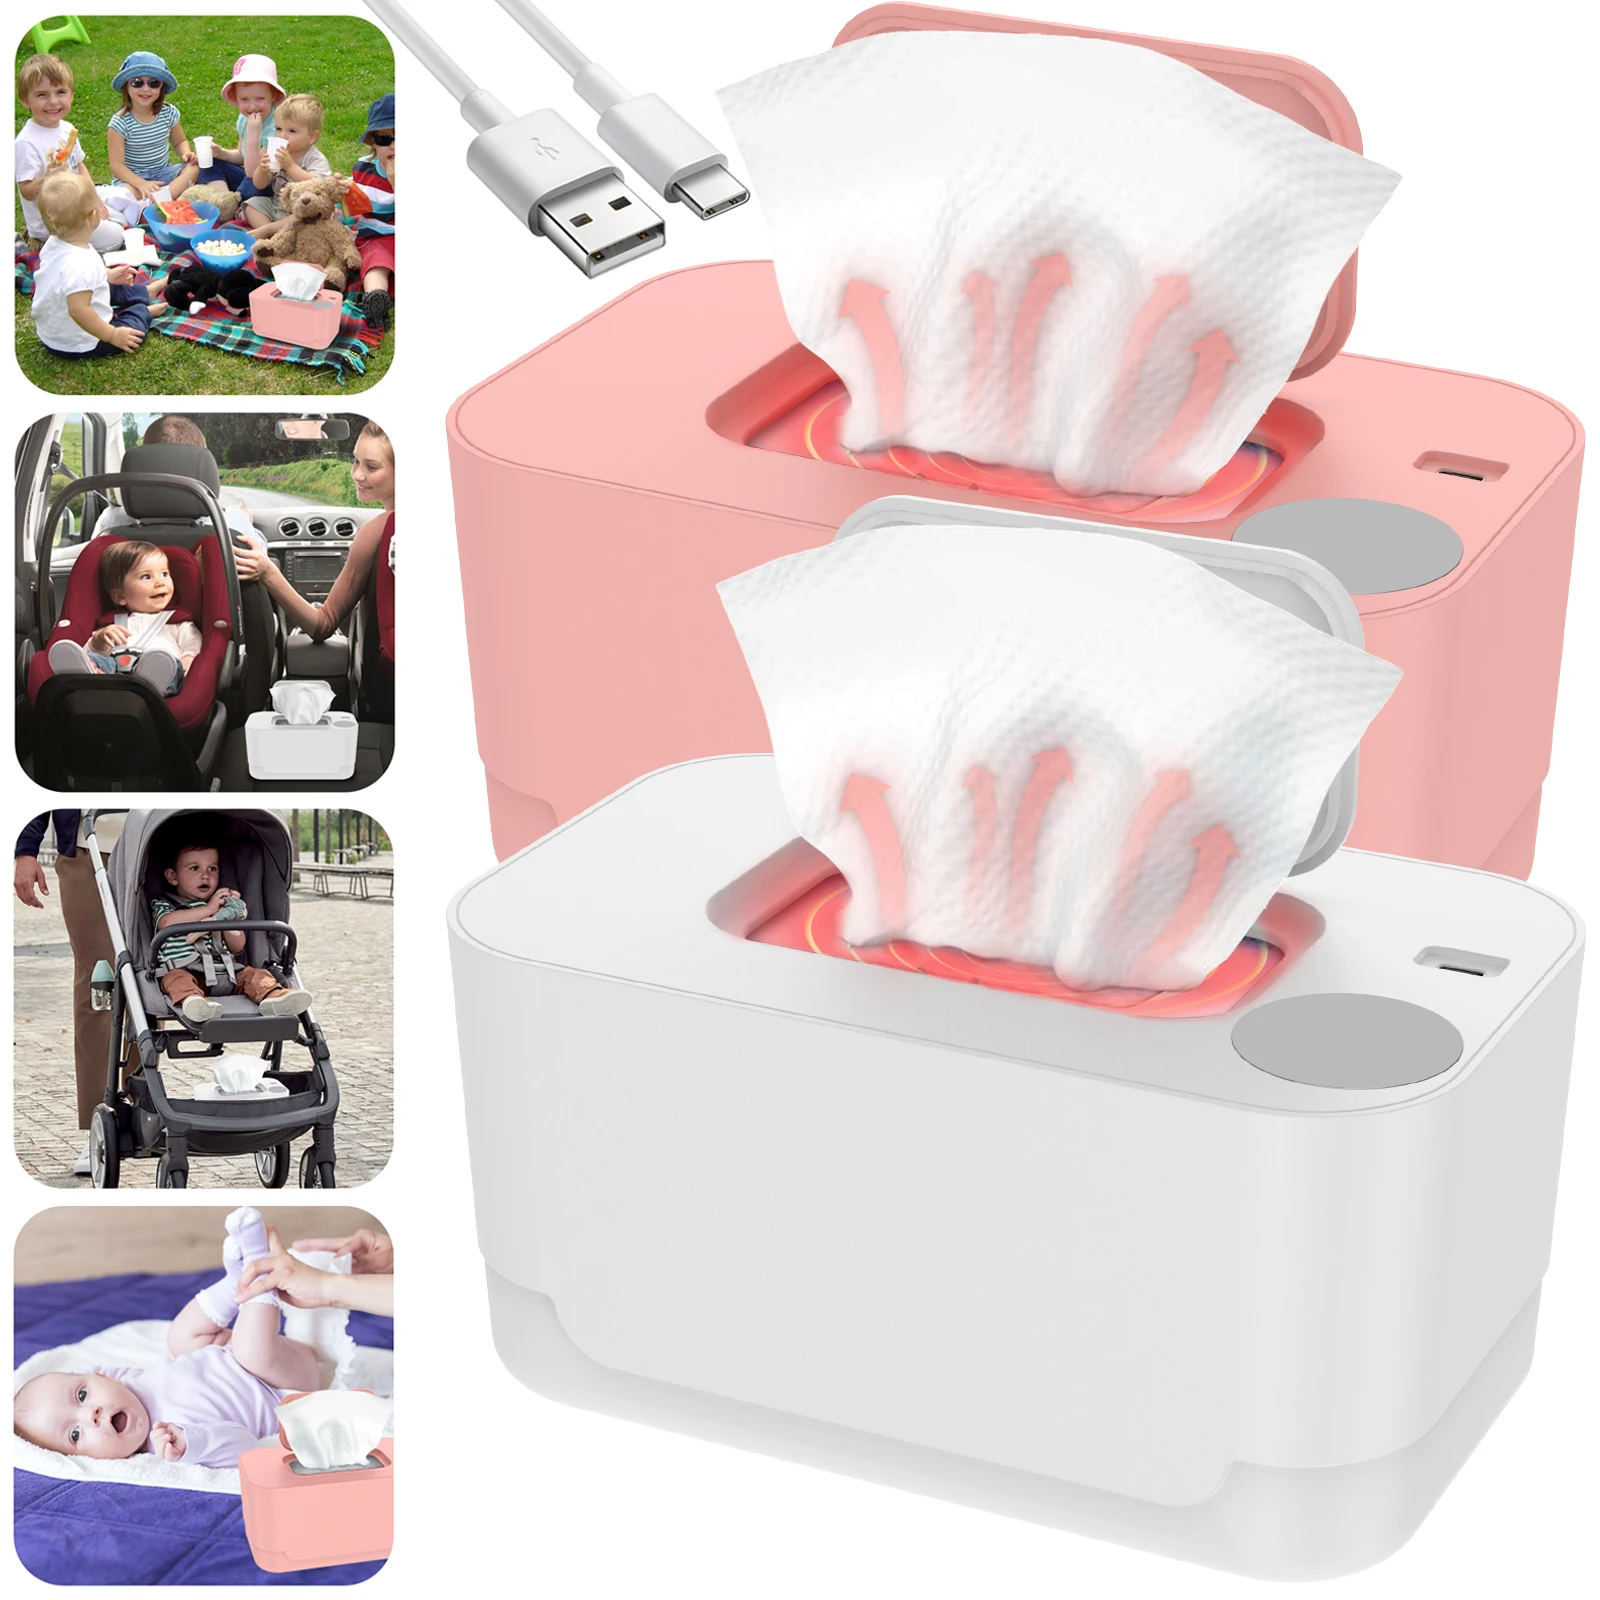 New Baby Wipe Warmer Heater USB Charge Quick Heating System Wet Wipe Warmer Wet Towel Dispenser Napkin Heating Box Home/Car Use